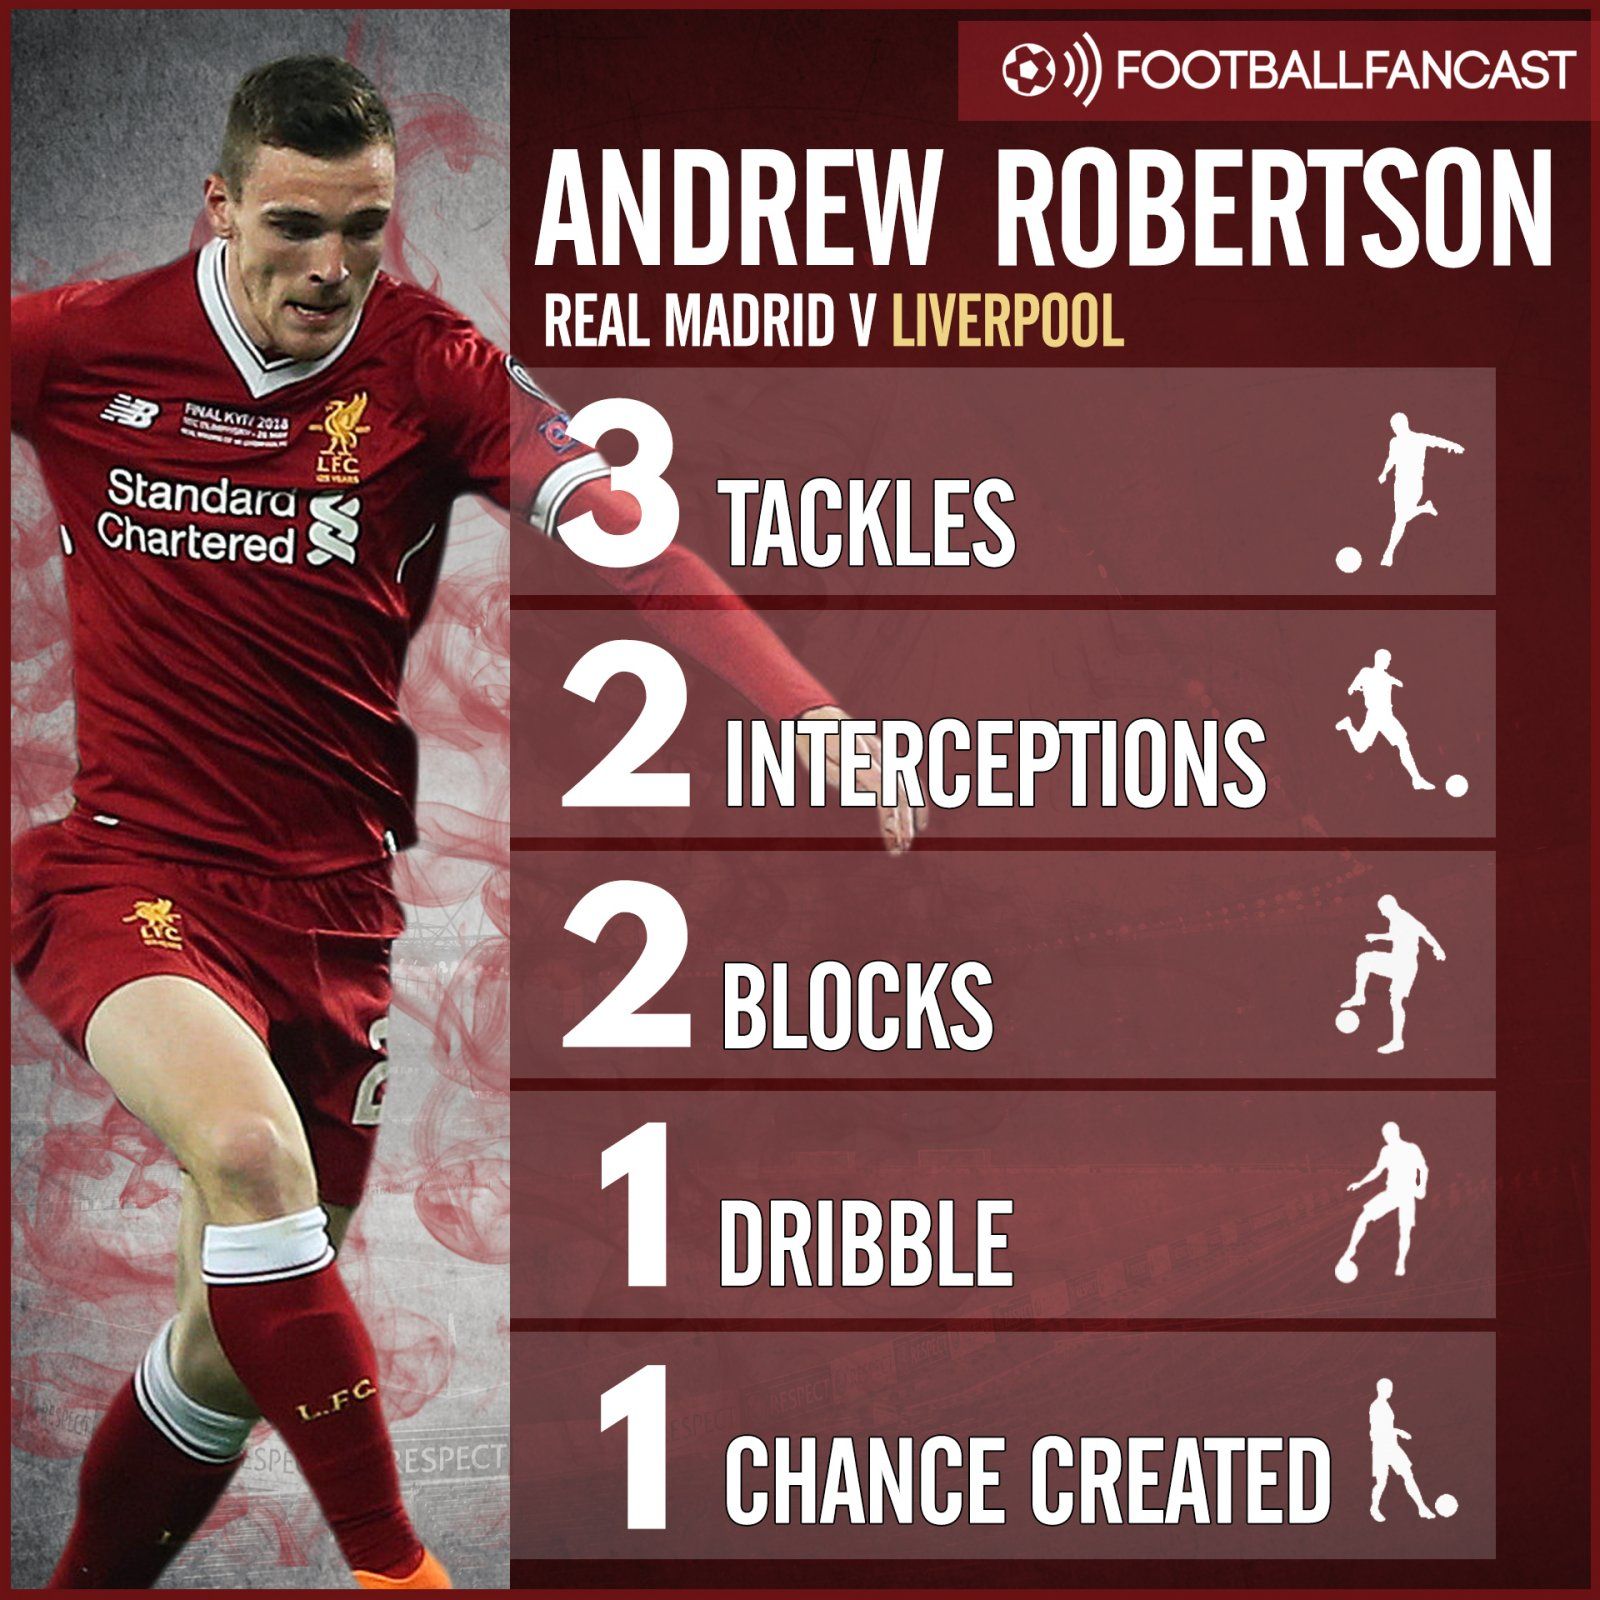 Andrew Robertson's stats from Champions League final